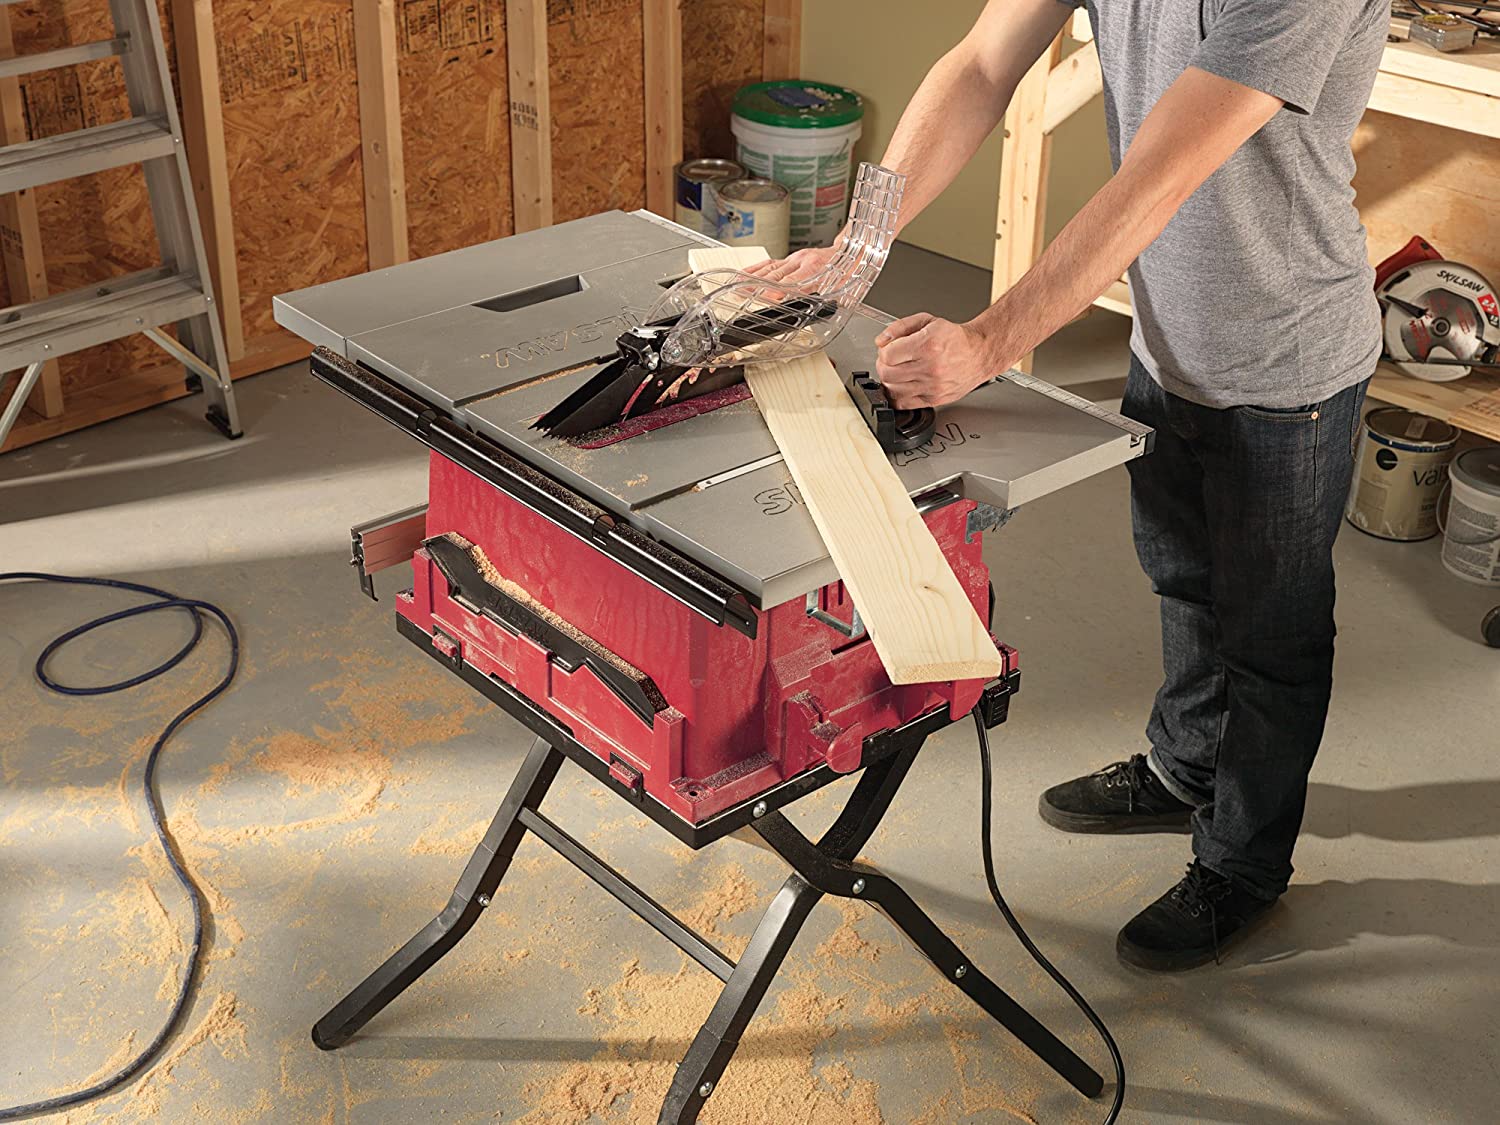 SKIL 3410 02 10 Inch Table Saw with Folding Stand. 1 - How to Cut a Groove in Wood With a Table Saw? - HandyMan.Guide - How to Cut a Groove in Wood With a Table Saw